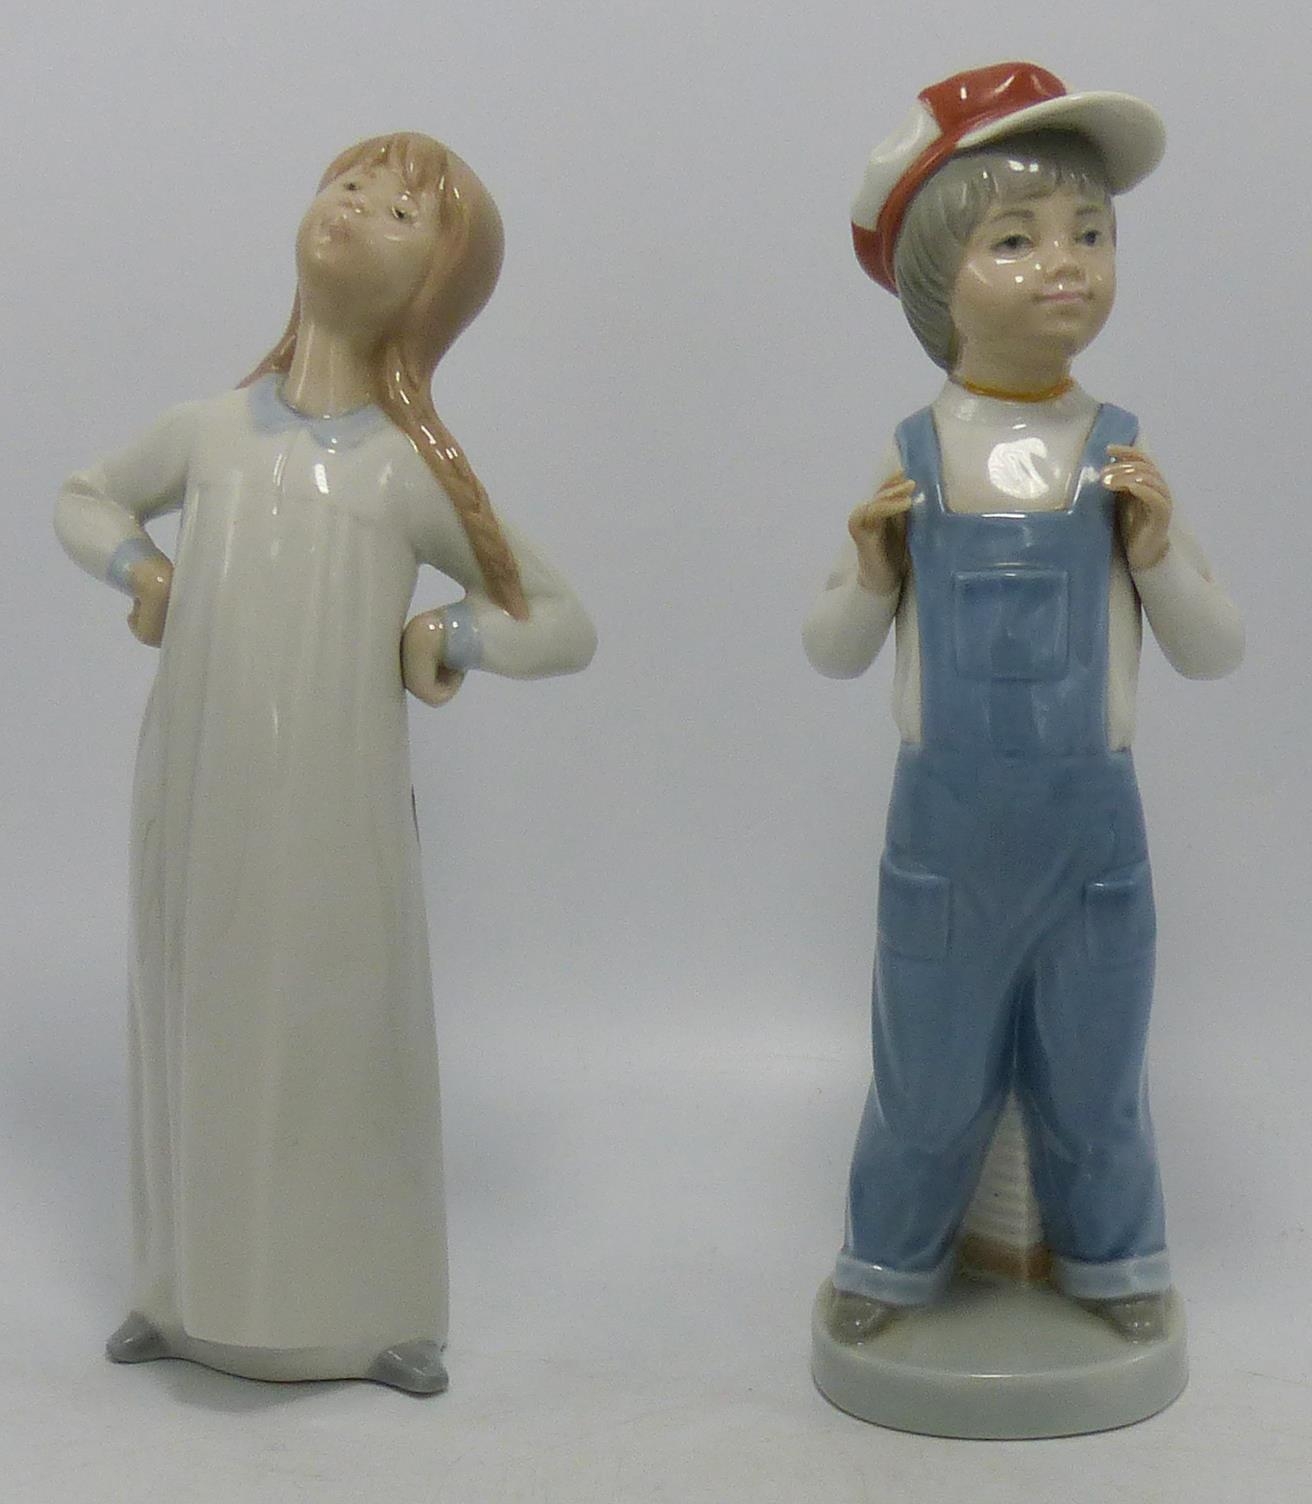 Lladro Figures of Boy with Organ & Tired Young Lady, hight 22cm(2)